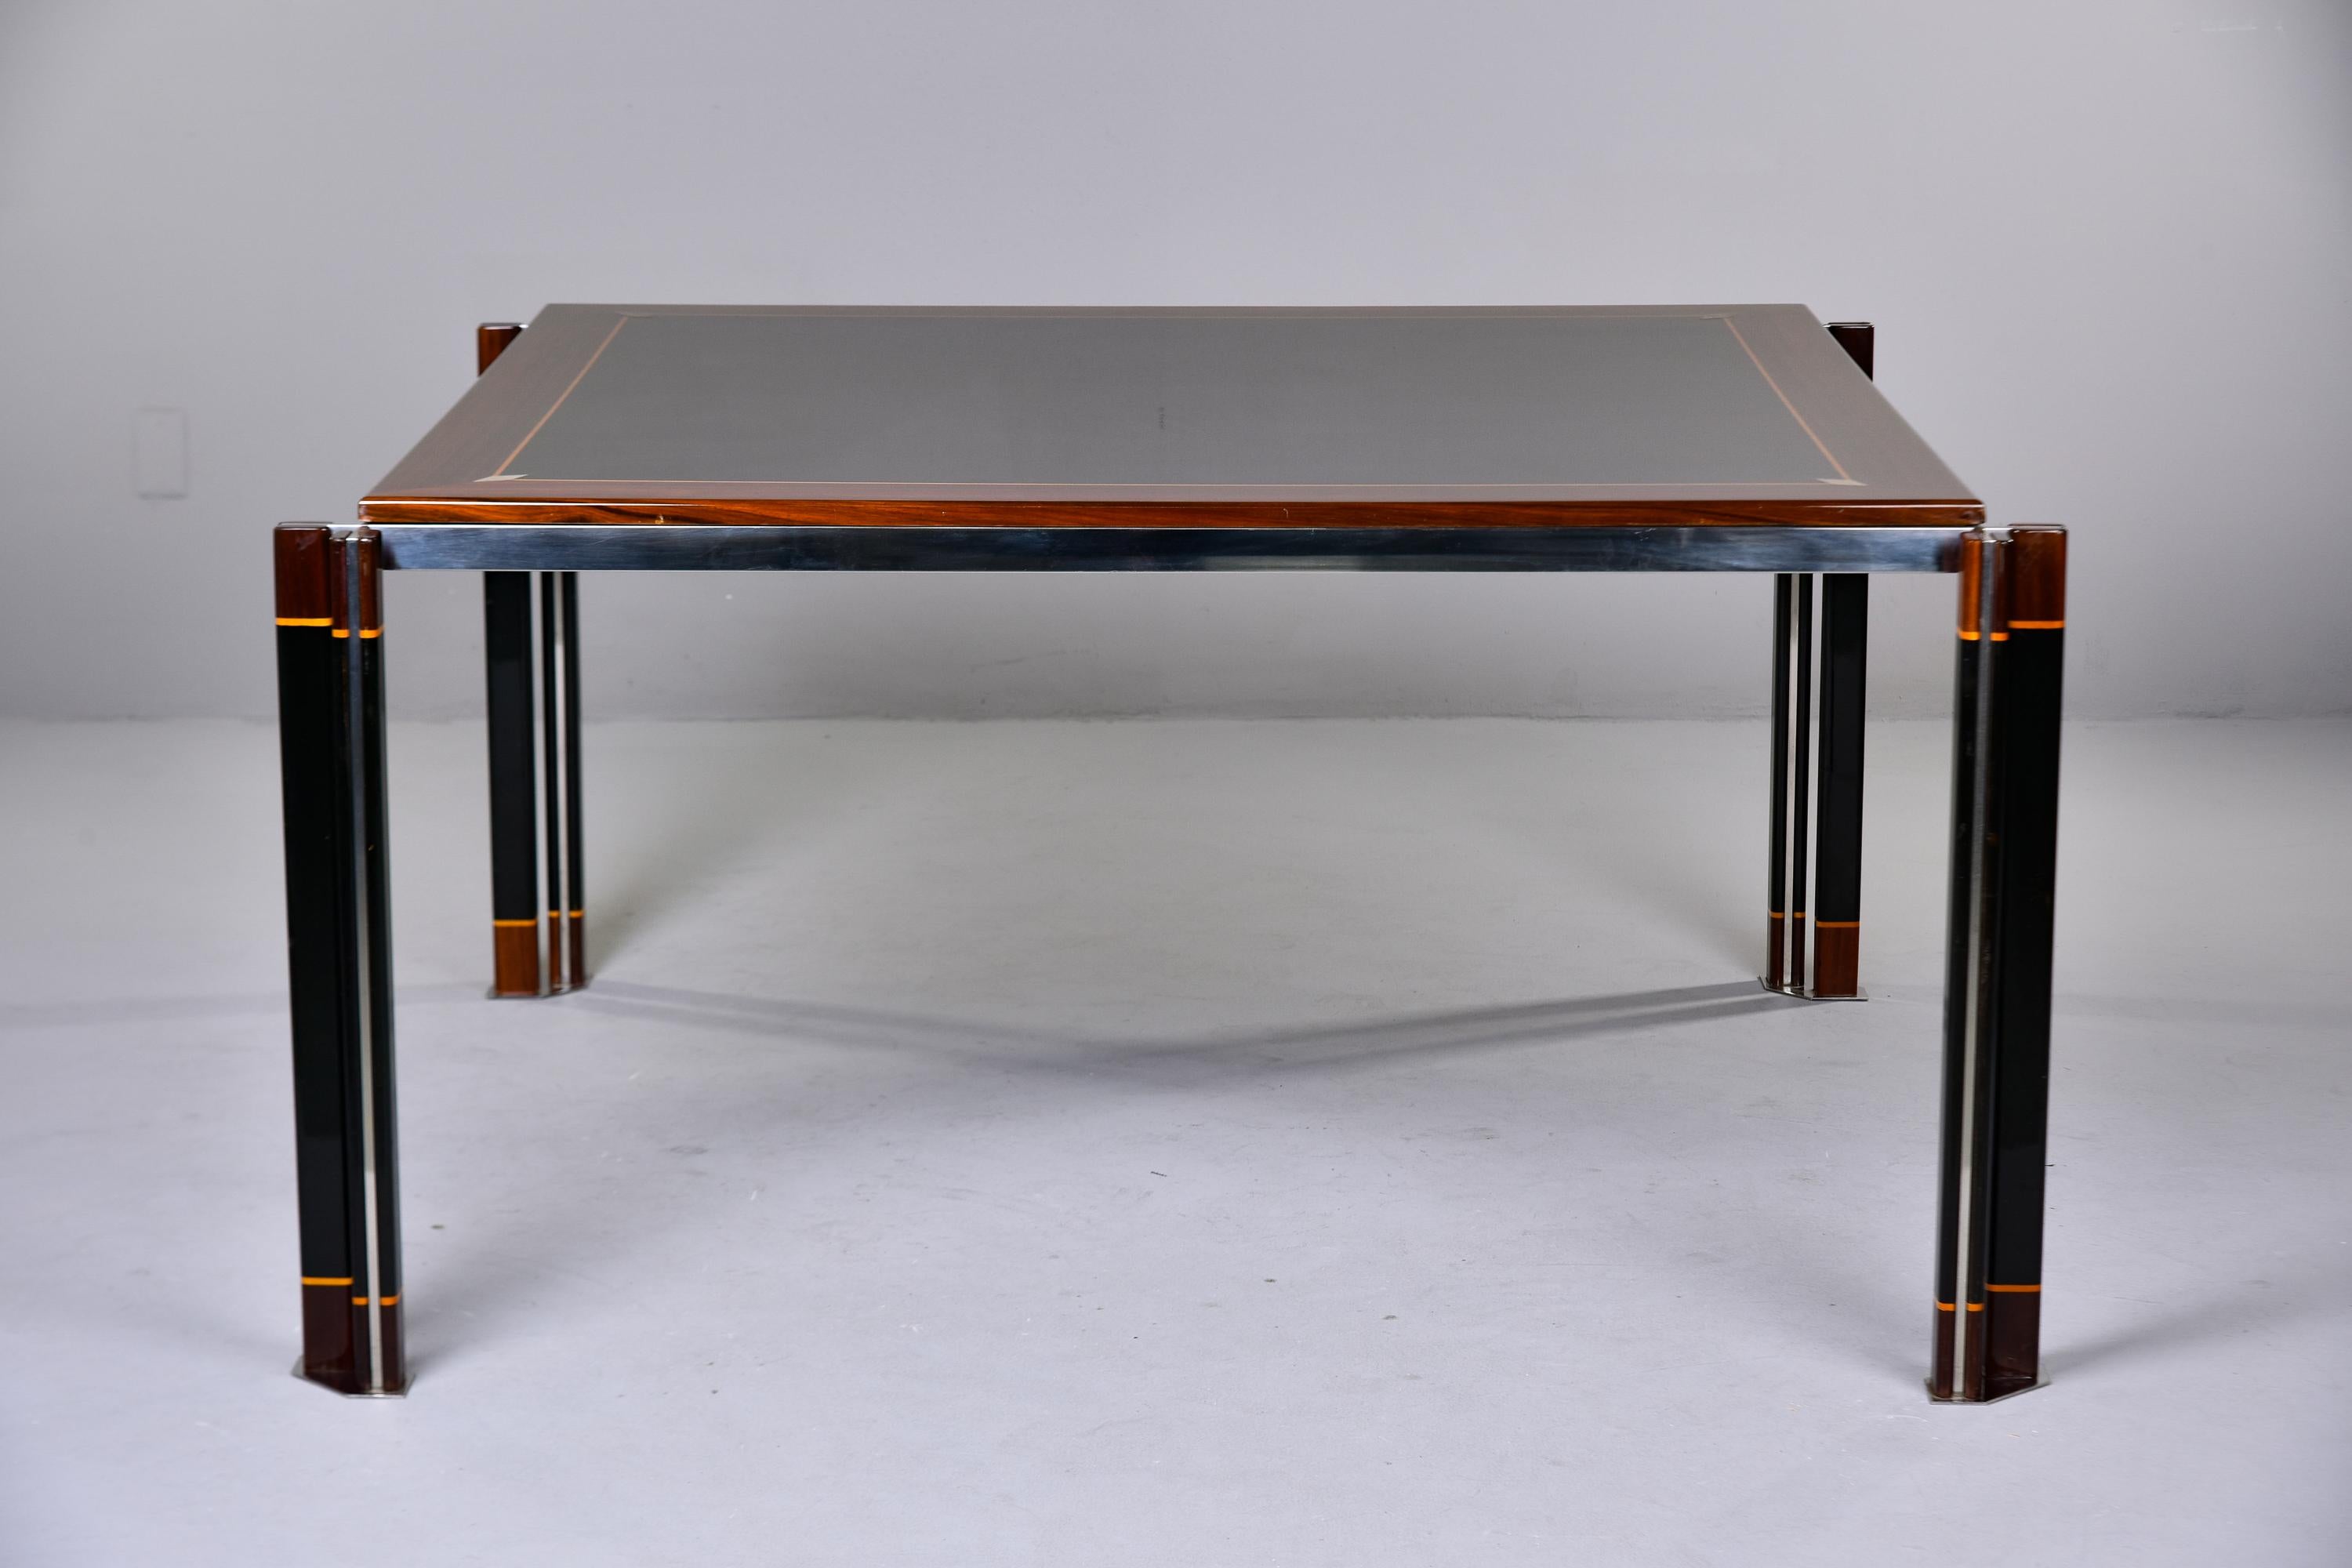 Italian Modernist Square Dining Table with Steel Detailing by Paolo Barracchia For Sale 7